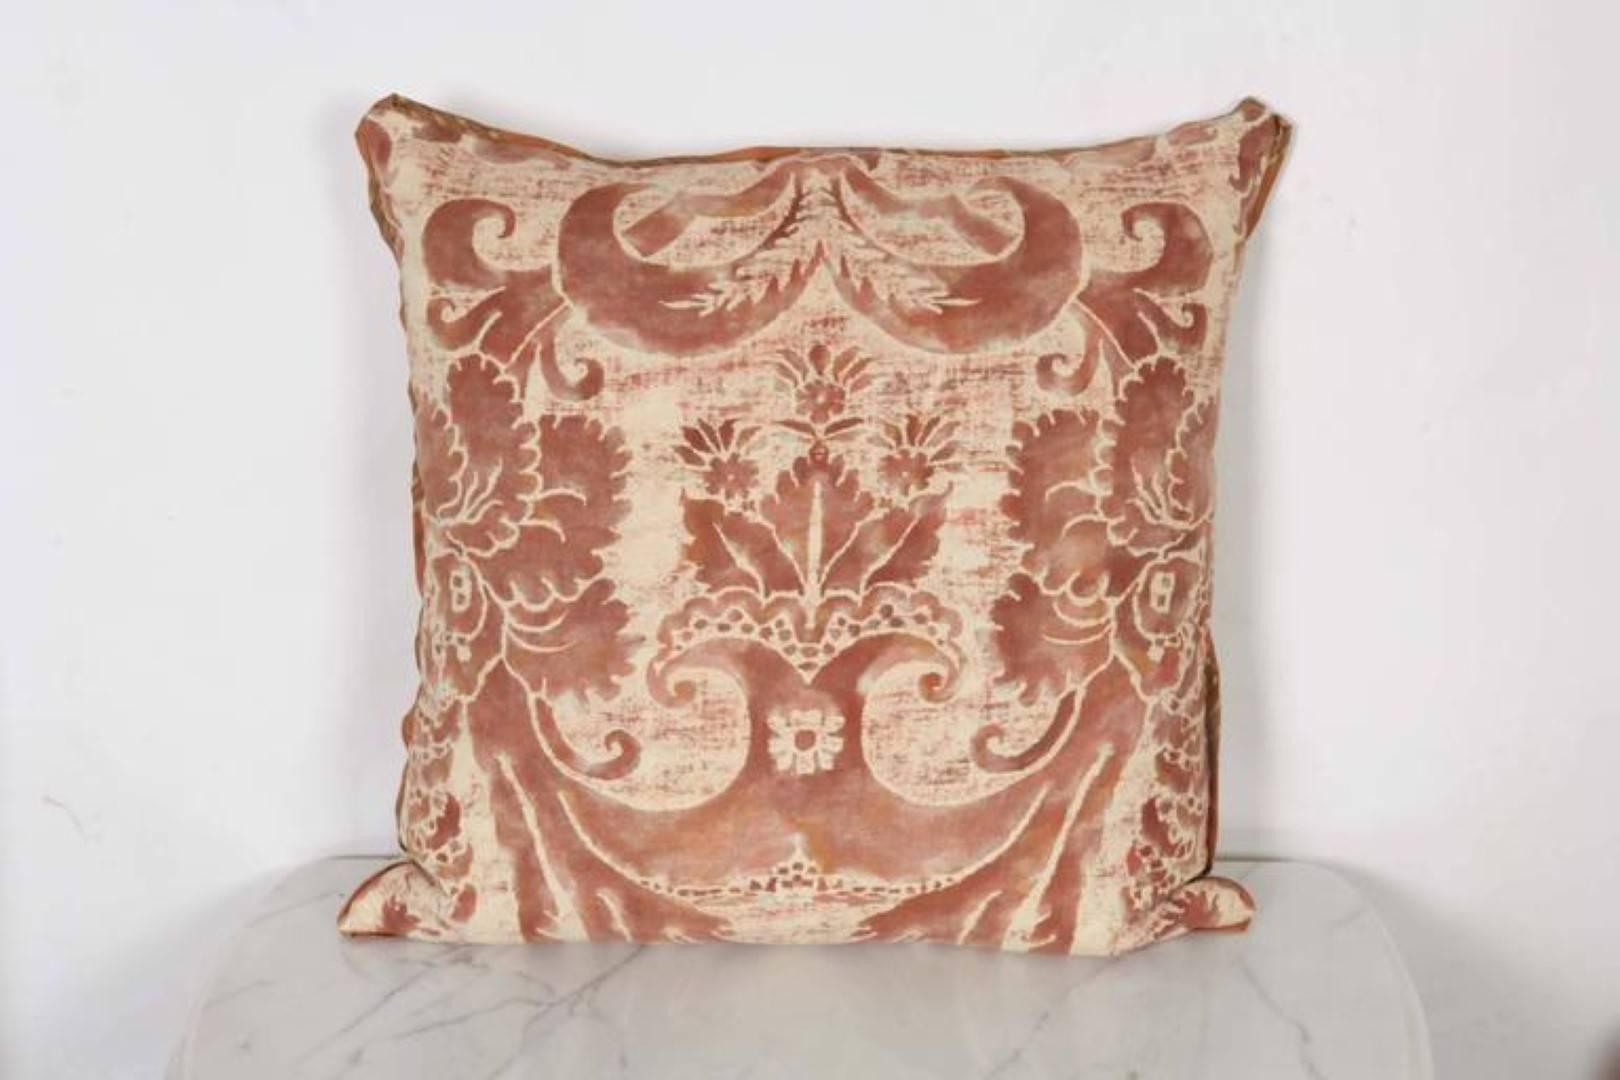 A pair of Fortuny fabric cushions in the Glicine pattern, caramel and white color way, cotton-linen blend backing material and striped silk bias edging, the pattern, 17th century Italian design with Wisteria motif. Newly made using vintage Fortuny